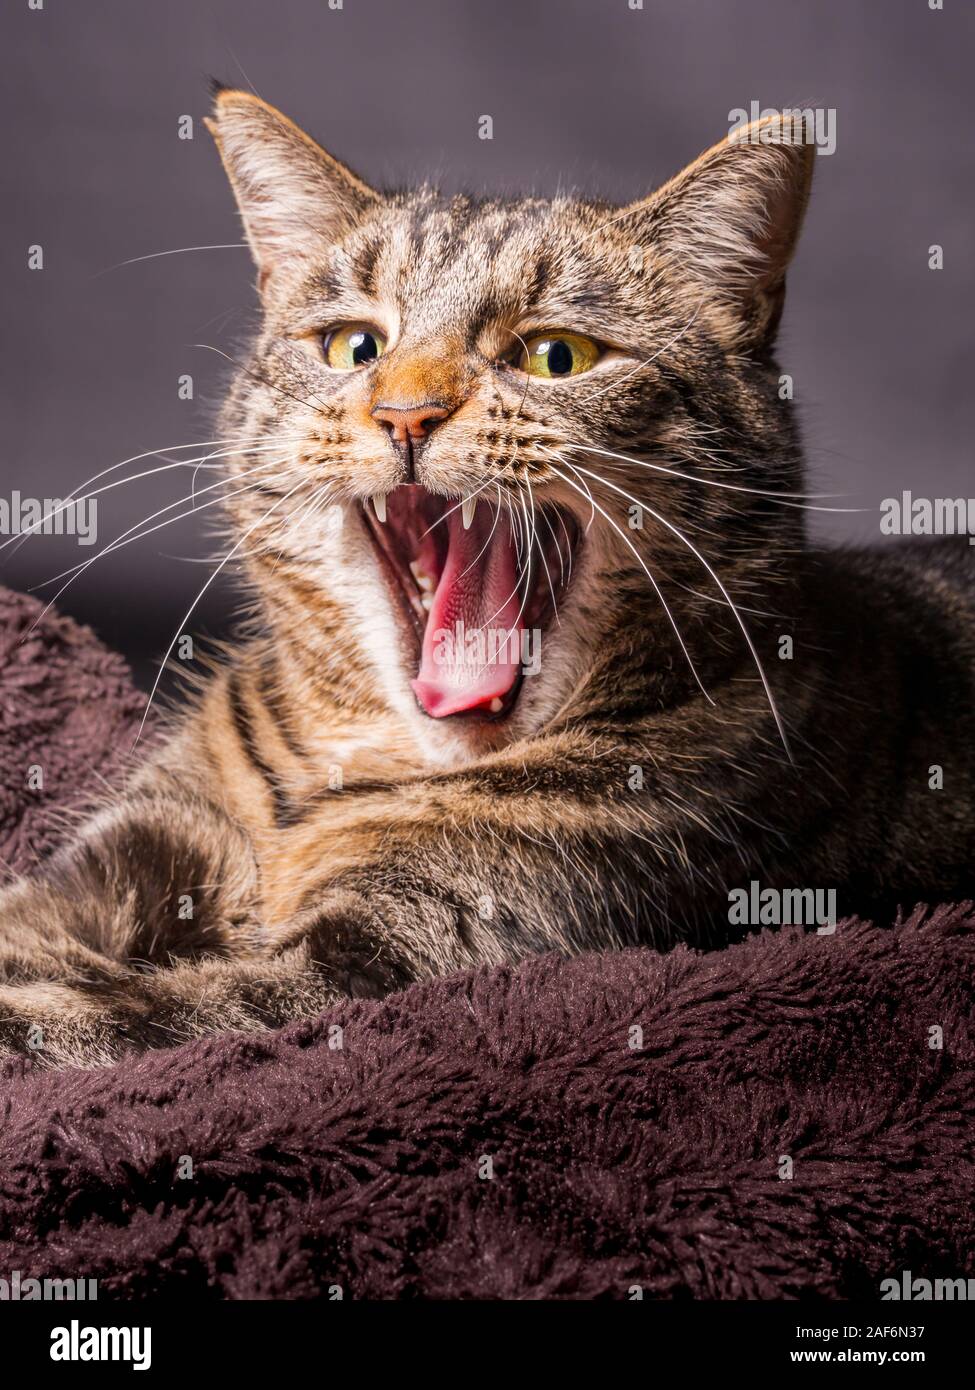 Young yawning European cat lying on a brown blanket Stock Photo